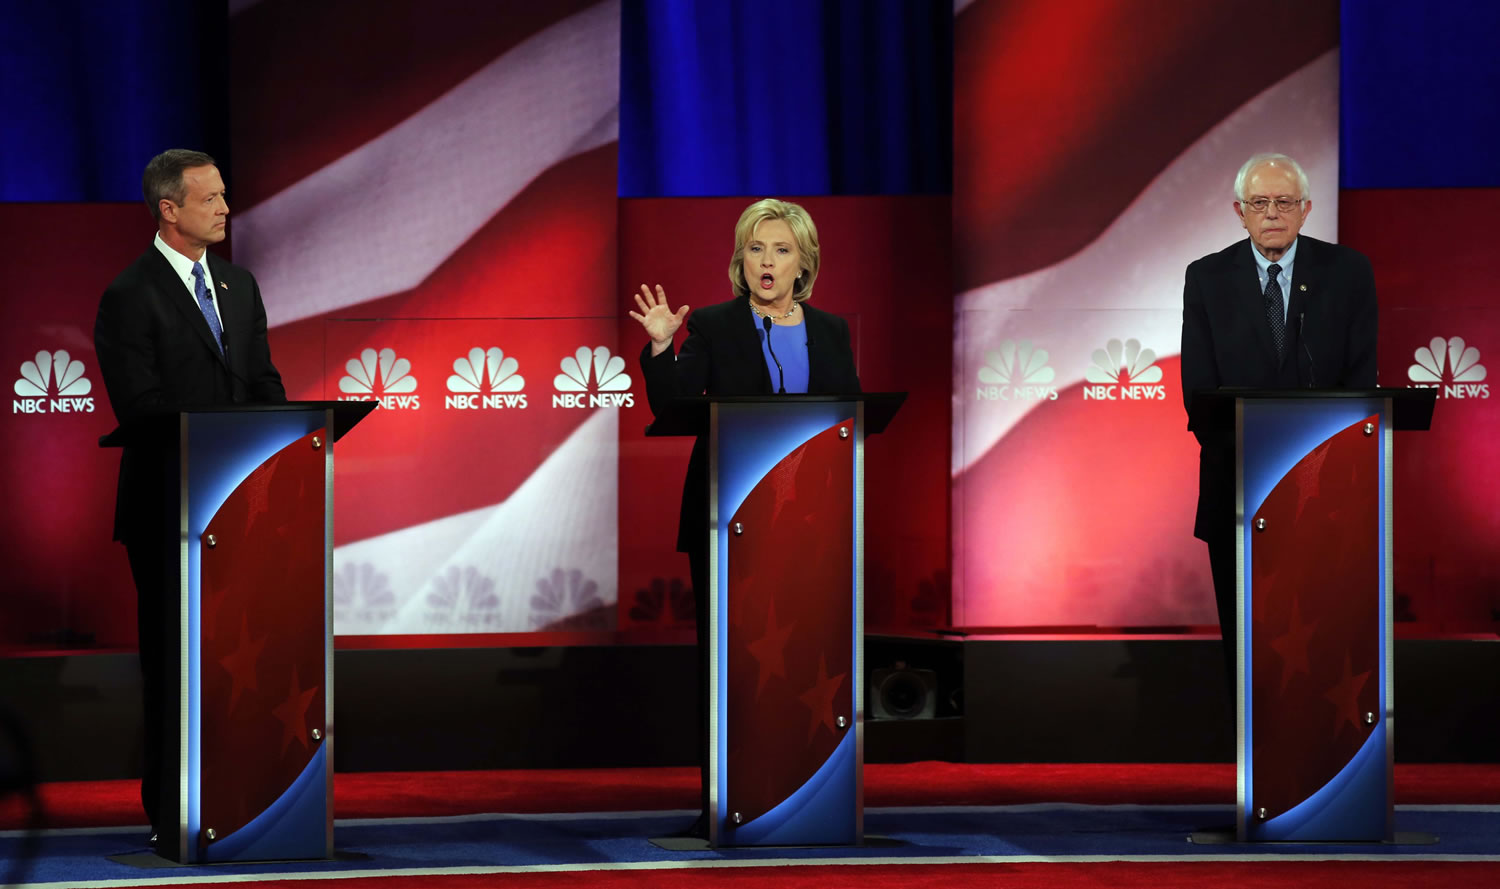 Democratic presidential candidate Hillary Clinton, center, speaks at the Democratic presidential debate at the Gaillard Center on Sunday in Charleston, S.C. To the left is Democratic presidential candidate and former Maryland Gov. Martin O'Malley and Democratic presidential candidate Sen. Bernie Sanders, I-Vt, left.